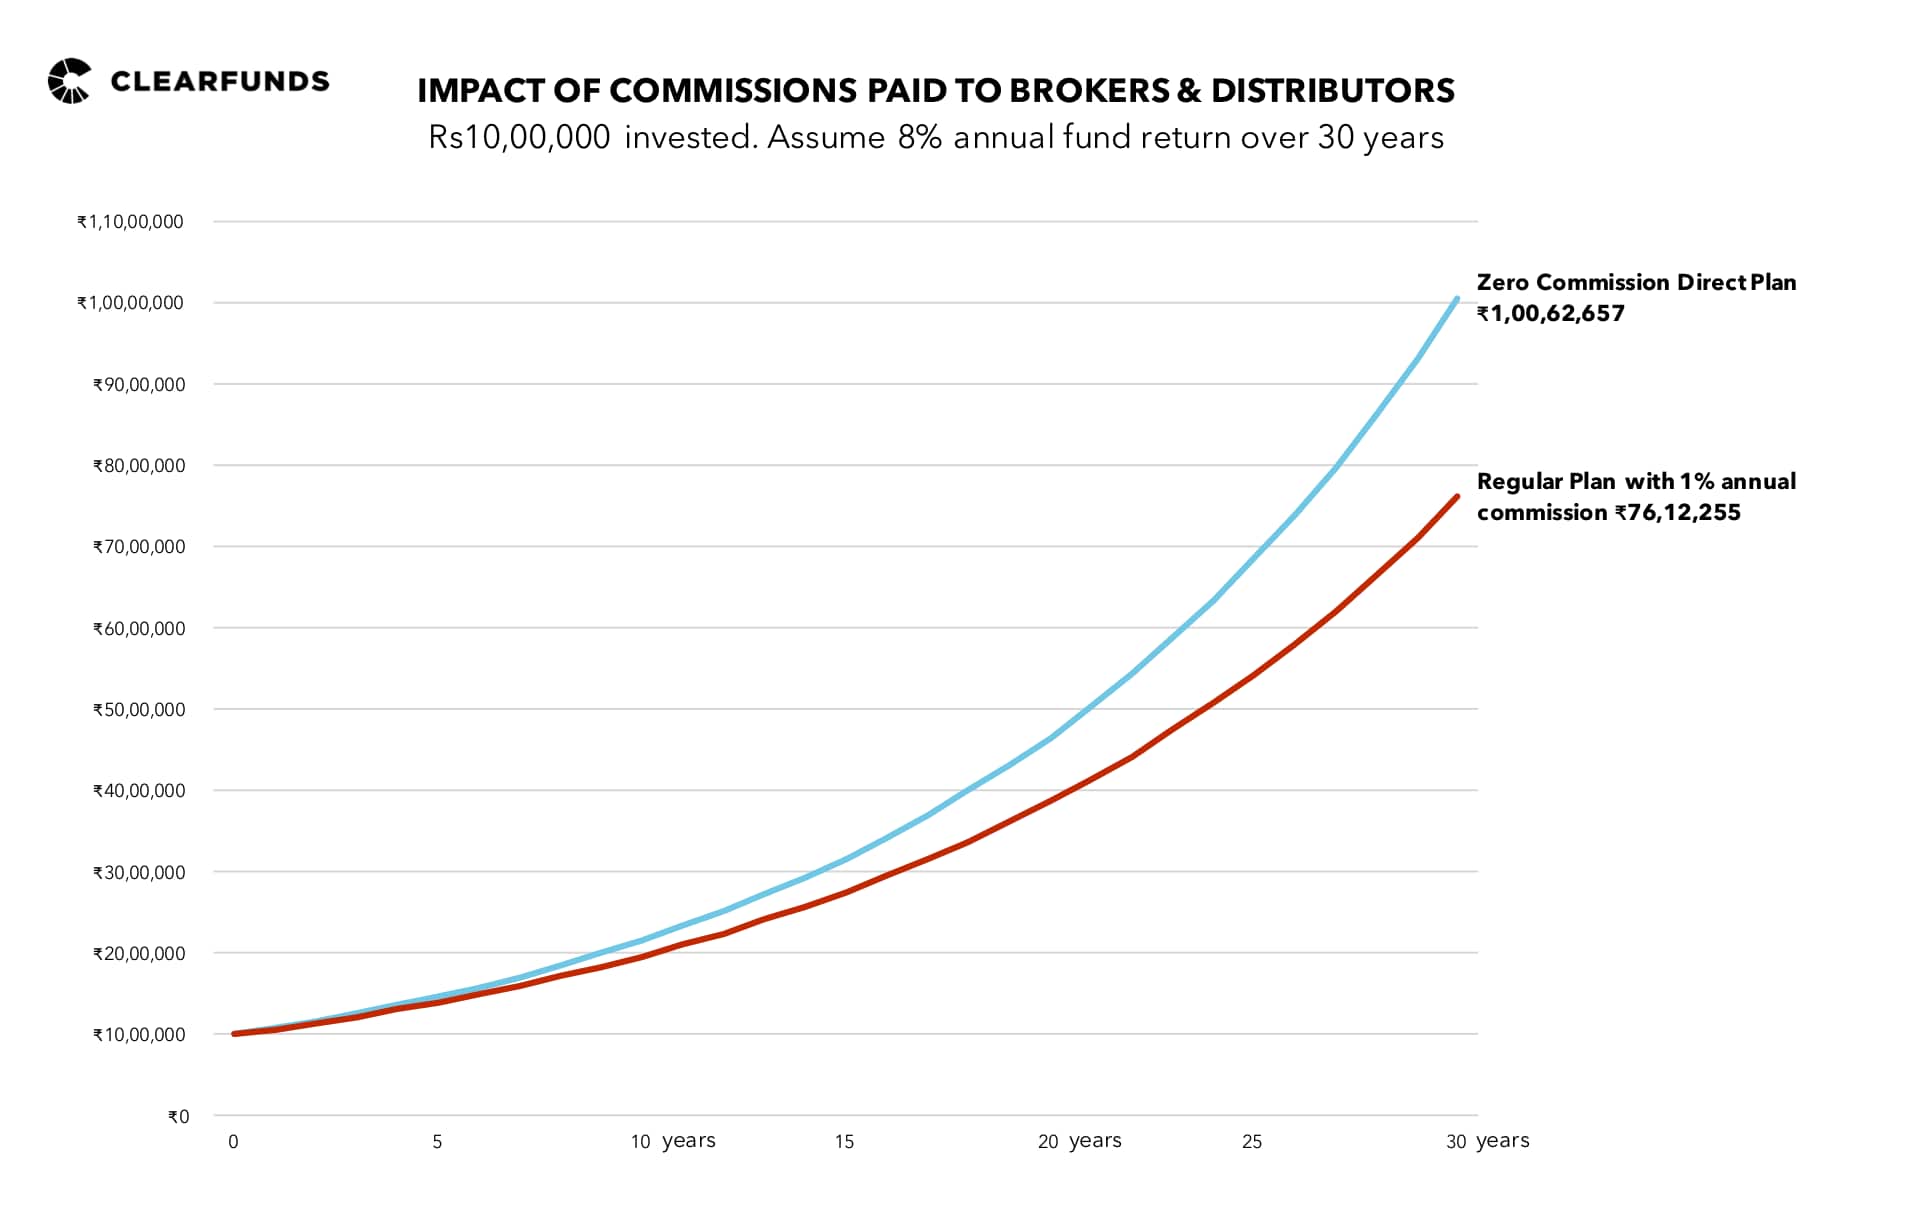 IMpact of commission paid to brokers